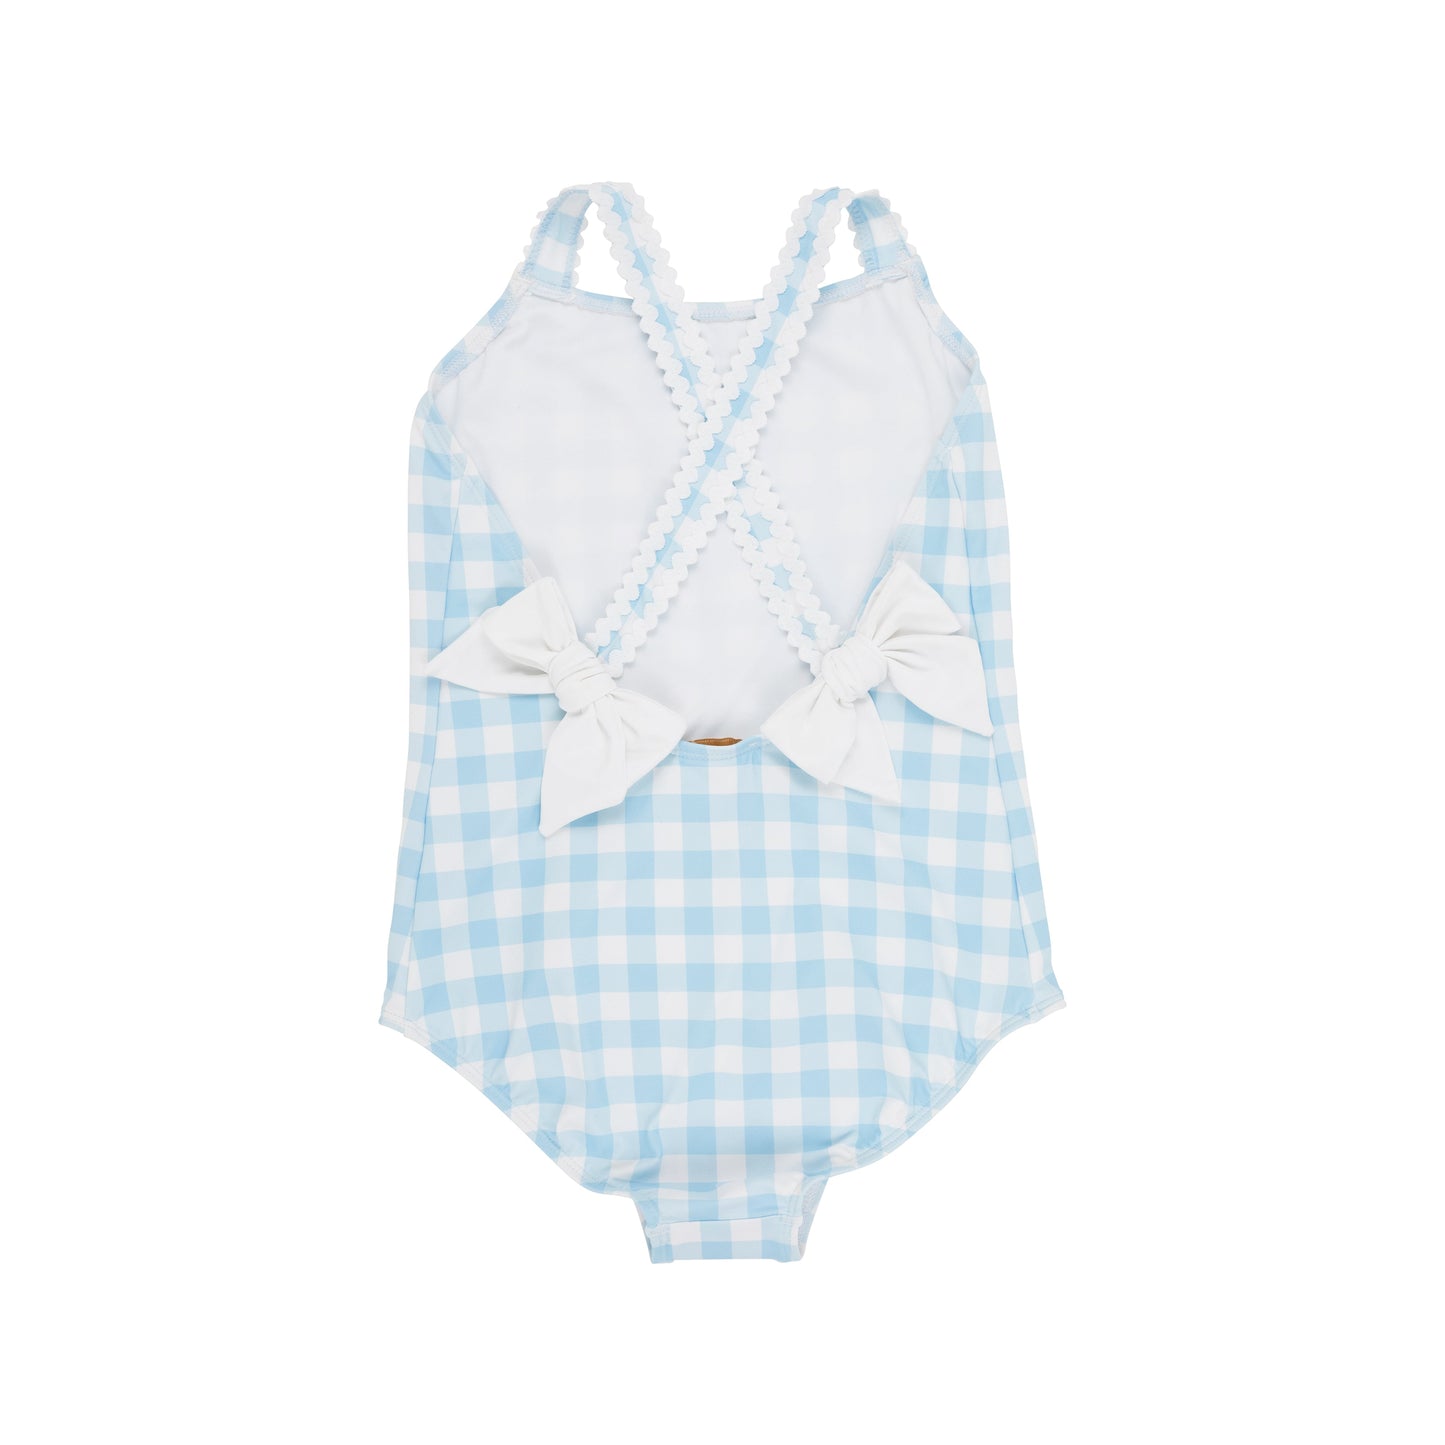 Taylor Bay Bathing Suit | Buckhead Blue Gingham With Worth Avenue White